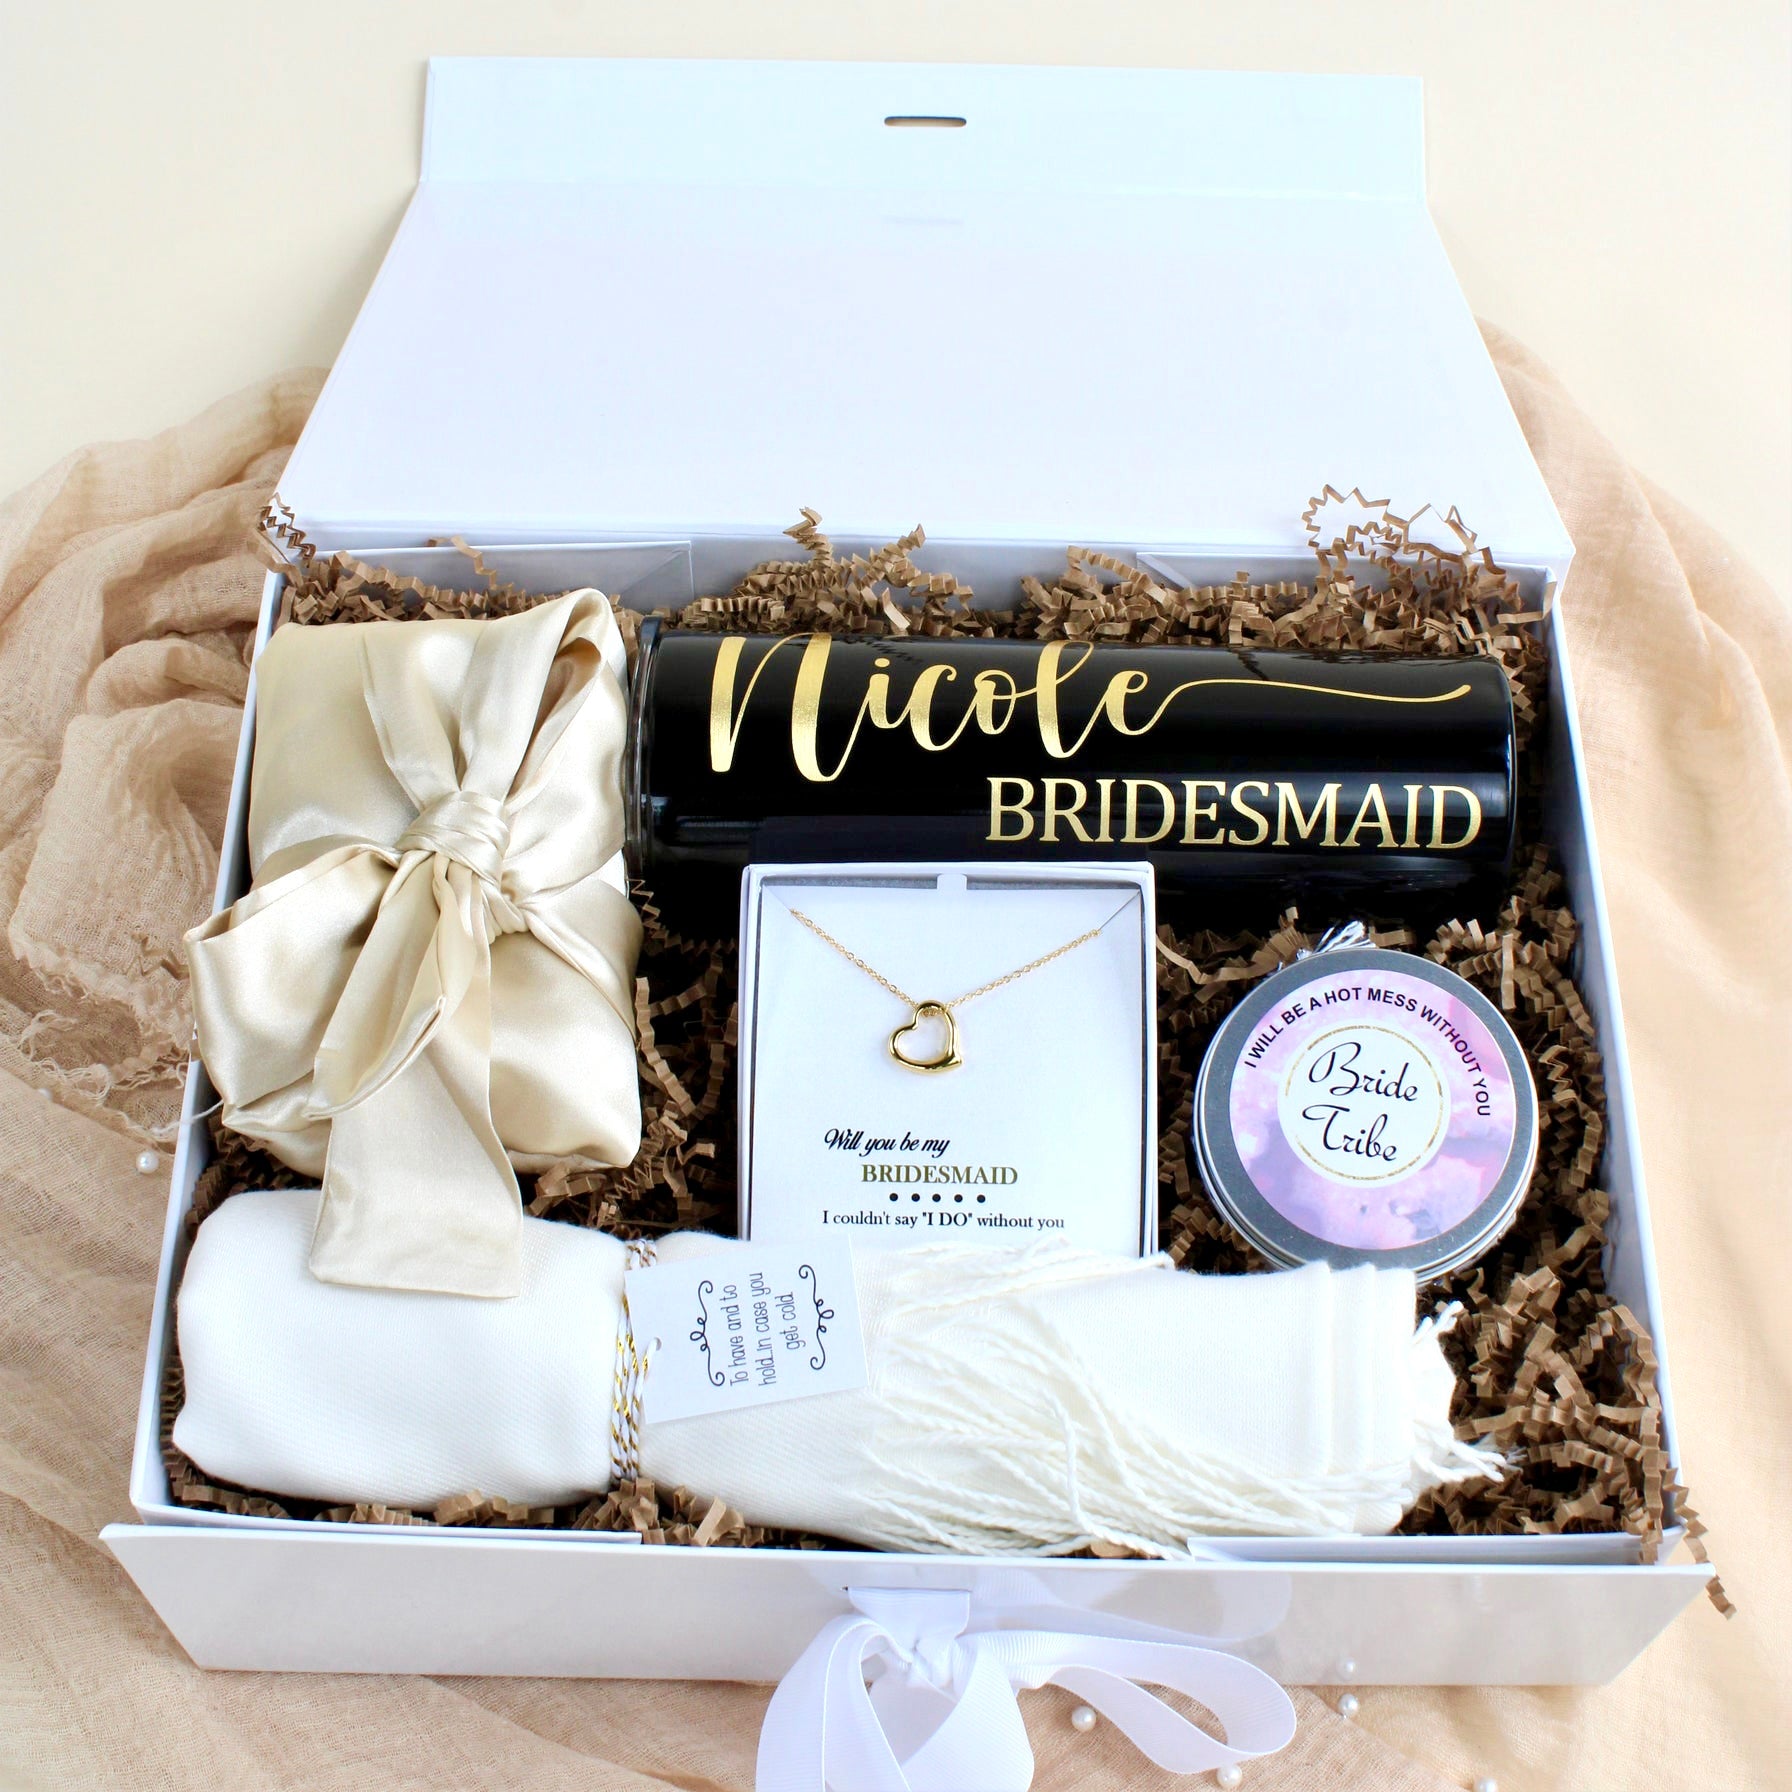 Build a Bridesmaid Proposal Gift Box options include Bridal Robes,  Tumblers, Pashminas, Champagne Glass, Necklace, Candle, Compact -  Bridesmaid Gifts Boutique